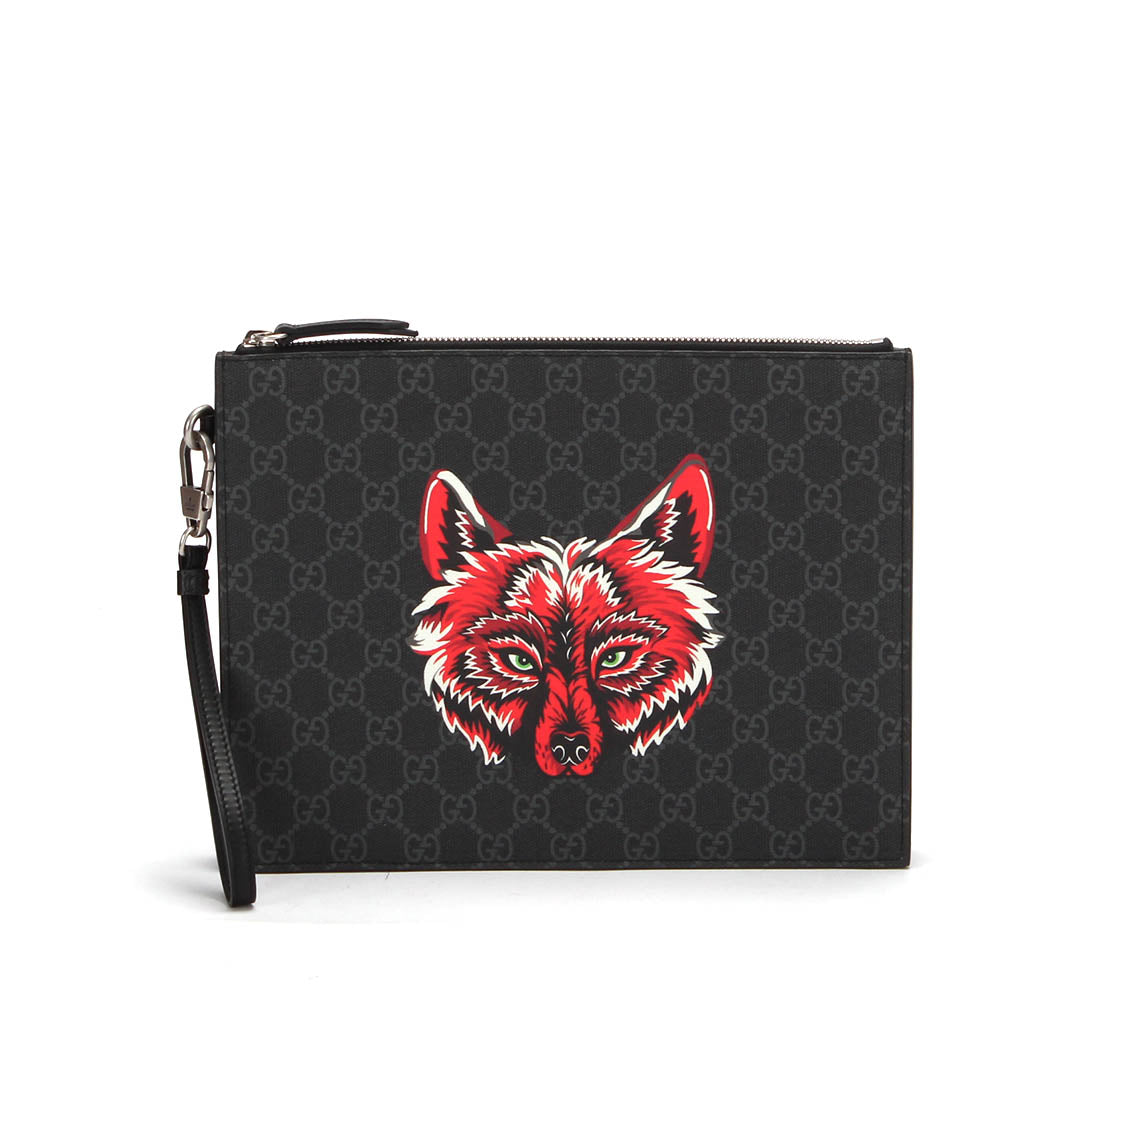 GG Supreme Coated Canvas Wolf Clutch Bag 547084